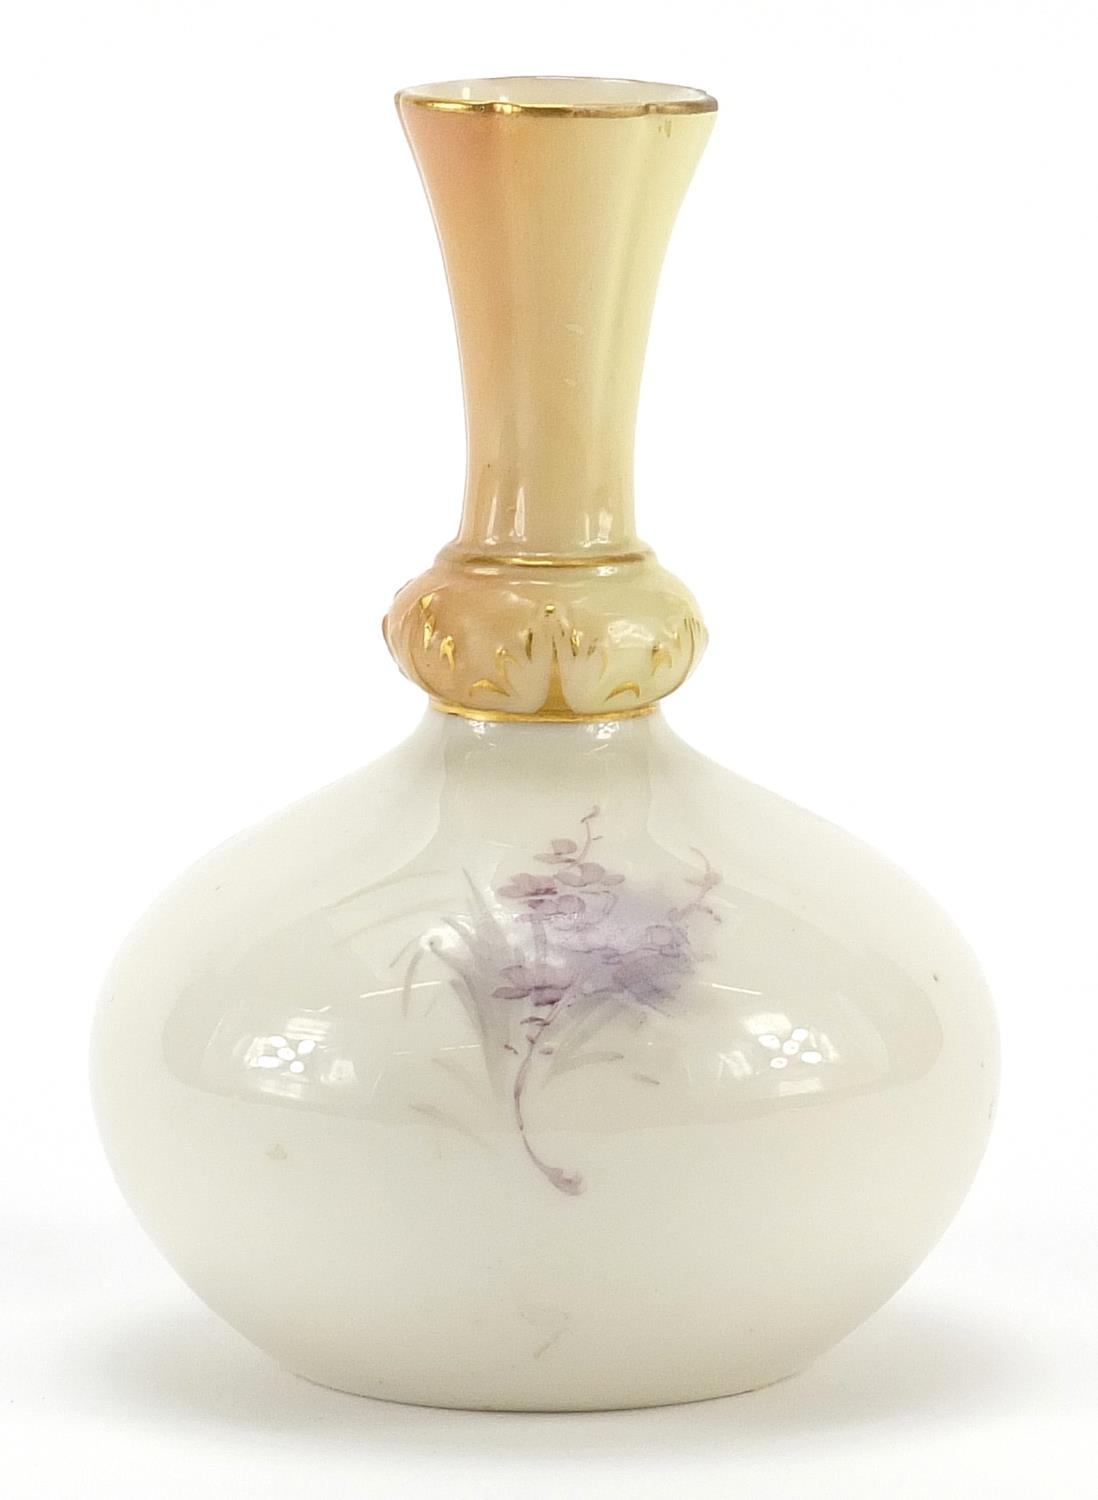 Royal Worcester porcelain vase hand painted with a pheasant, 12.5cm high - Image 2 of 3